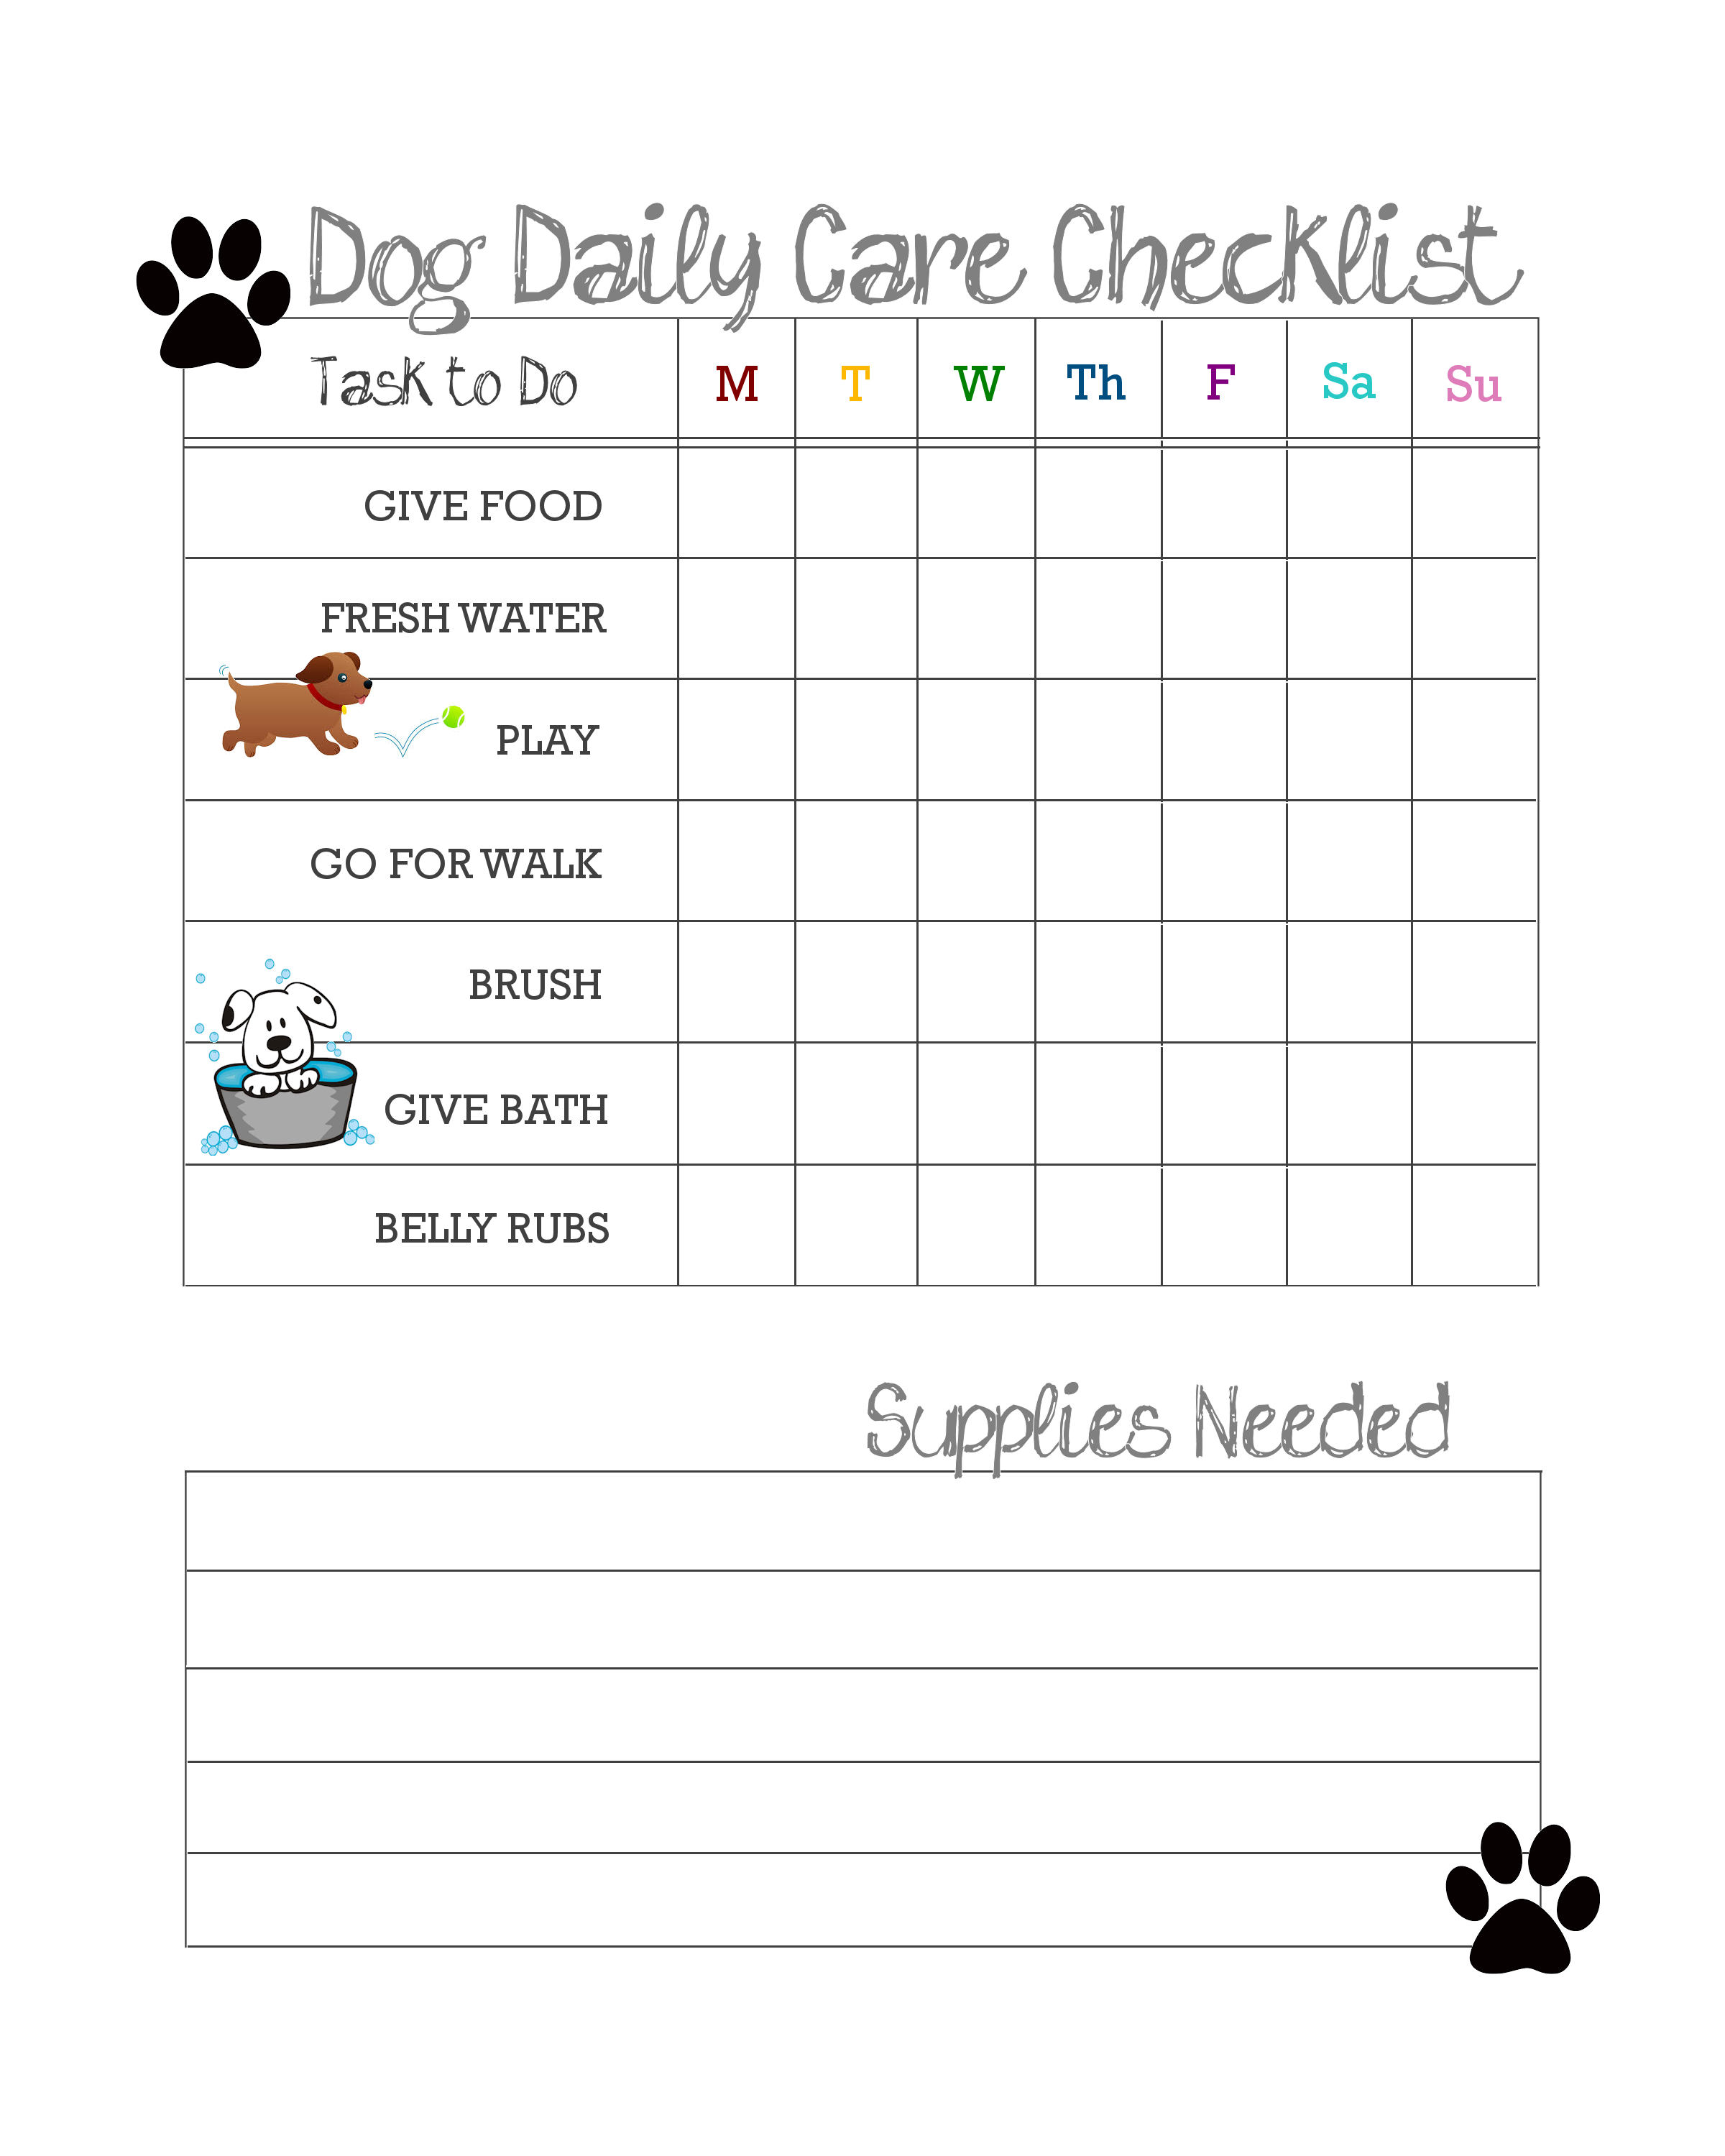 Daily Dog Care Checklist Free Printable - Our Kid Things In Dog Sitting Checklist Template Regarding Dog Sitting Checklist Template